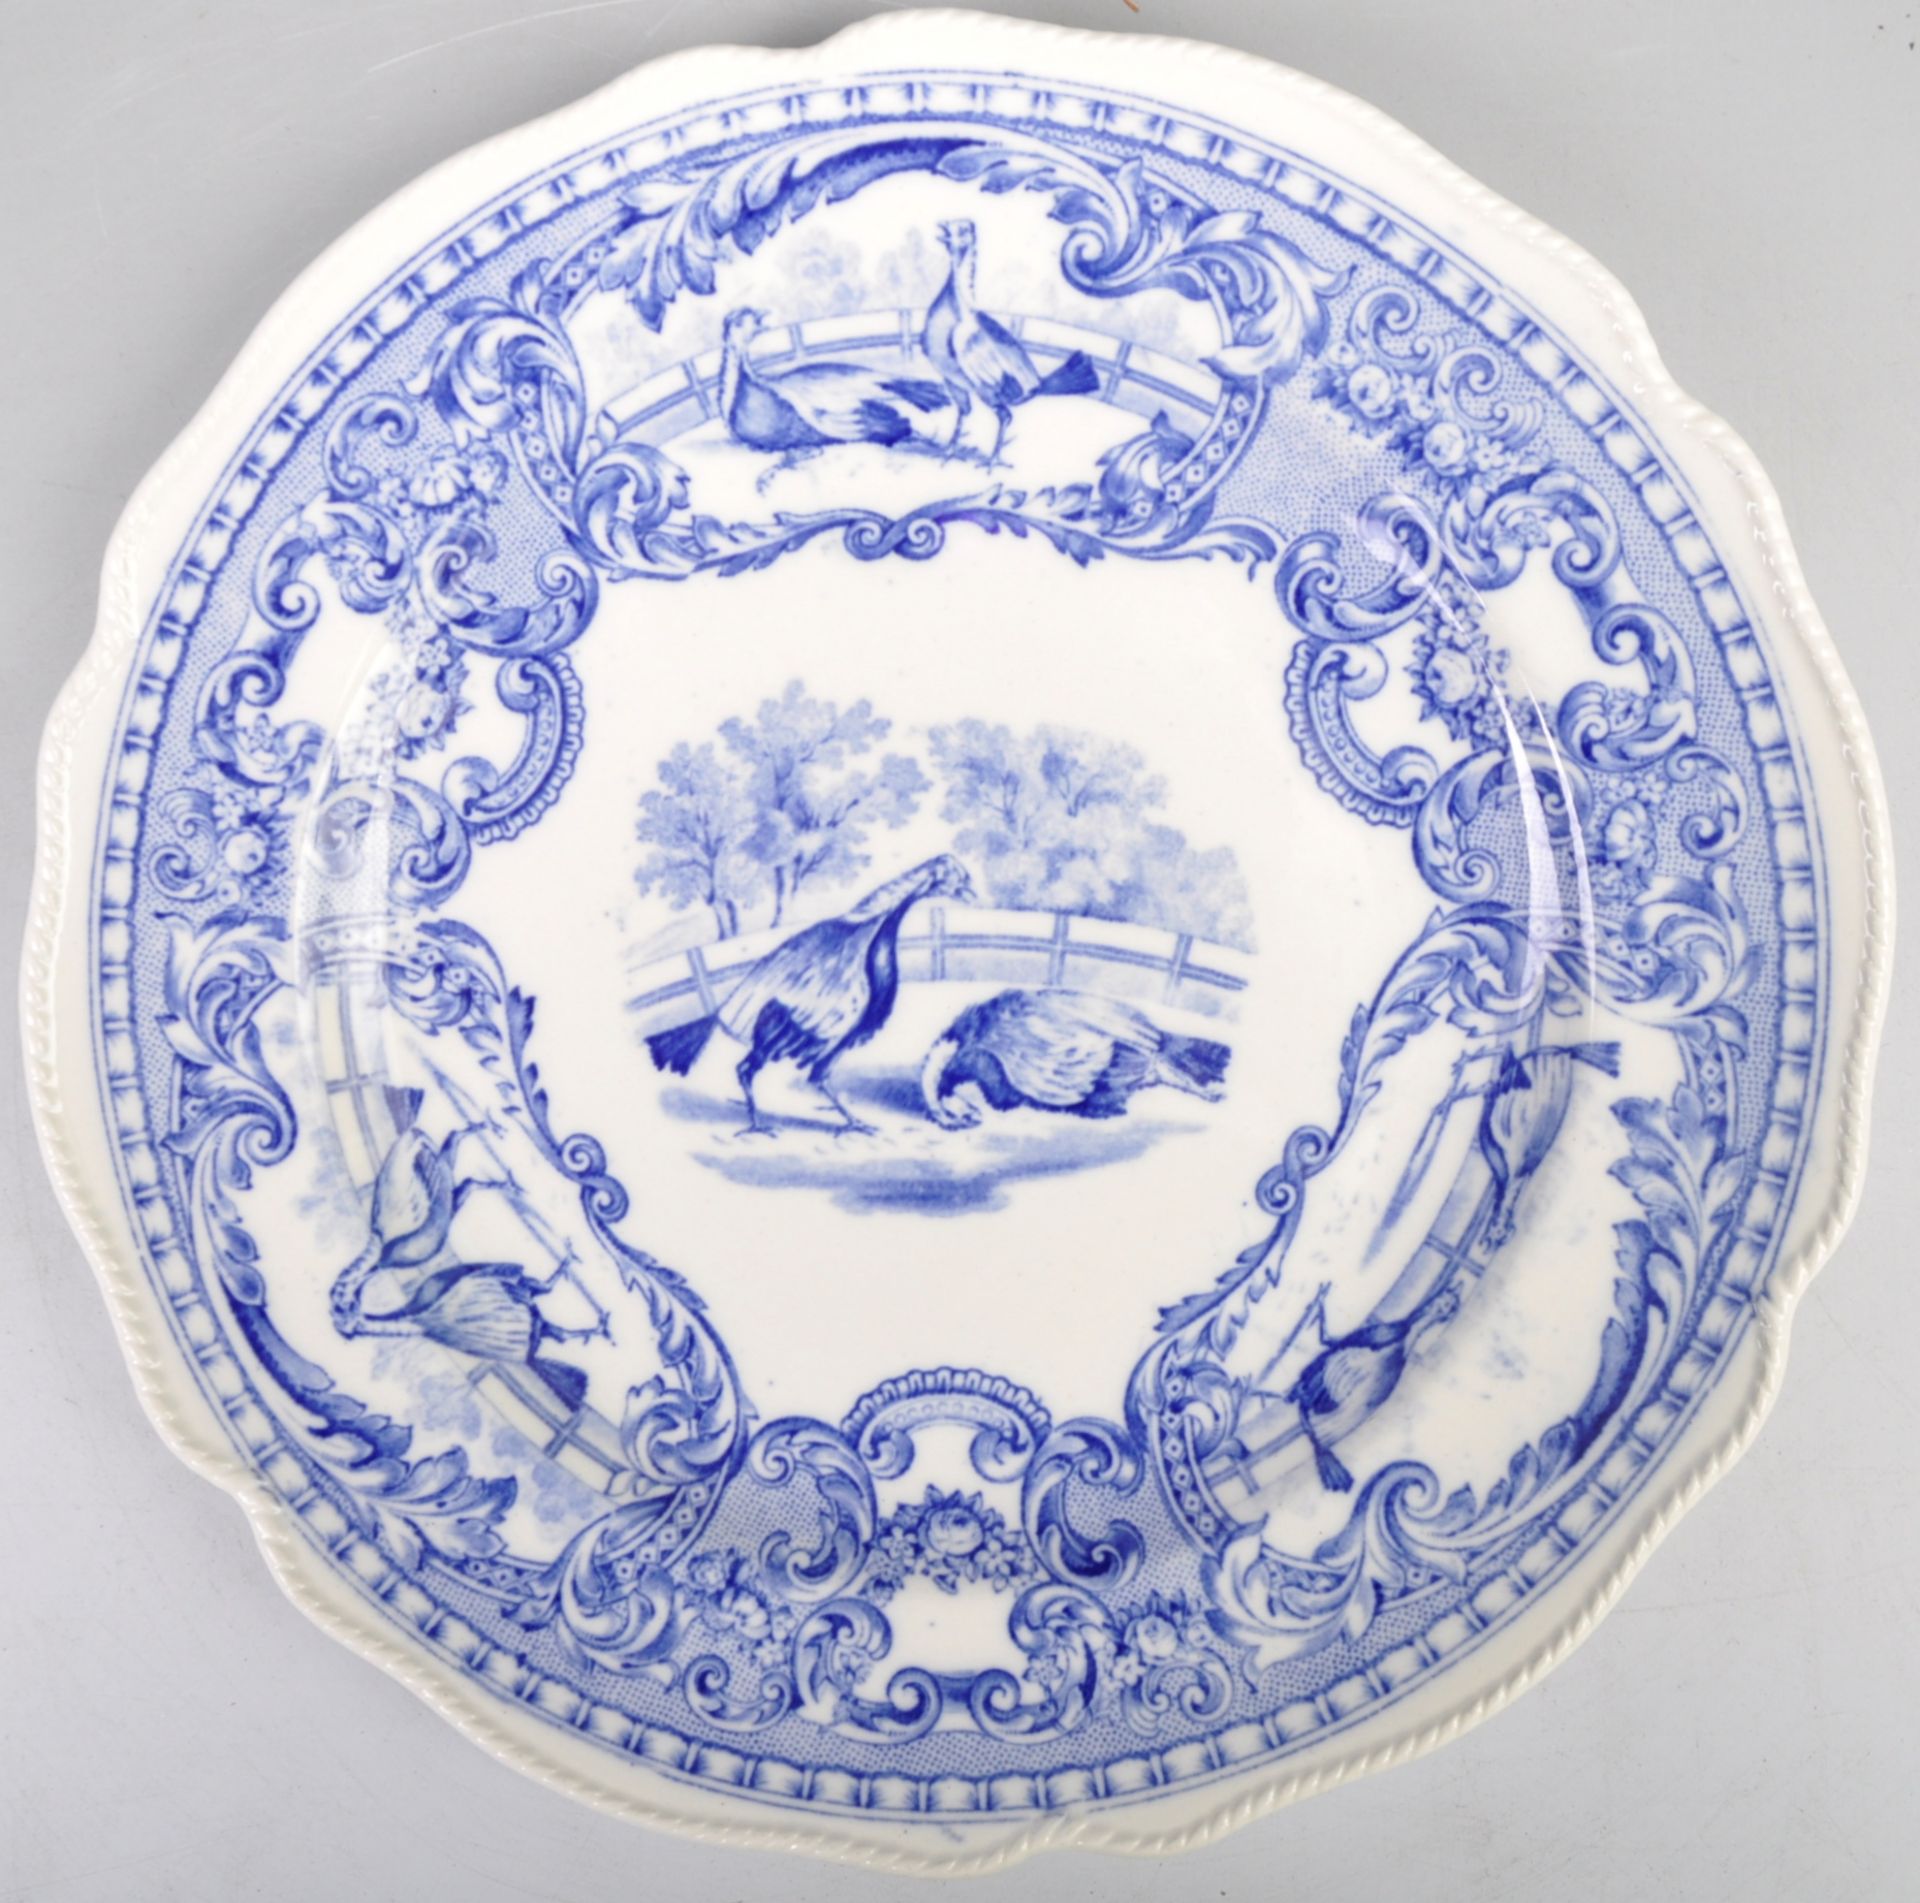 ANTIQUE COPELAND SPODE BLUE AND WHITE COCKFIGHTING PLATE